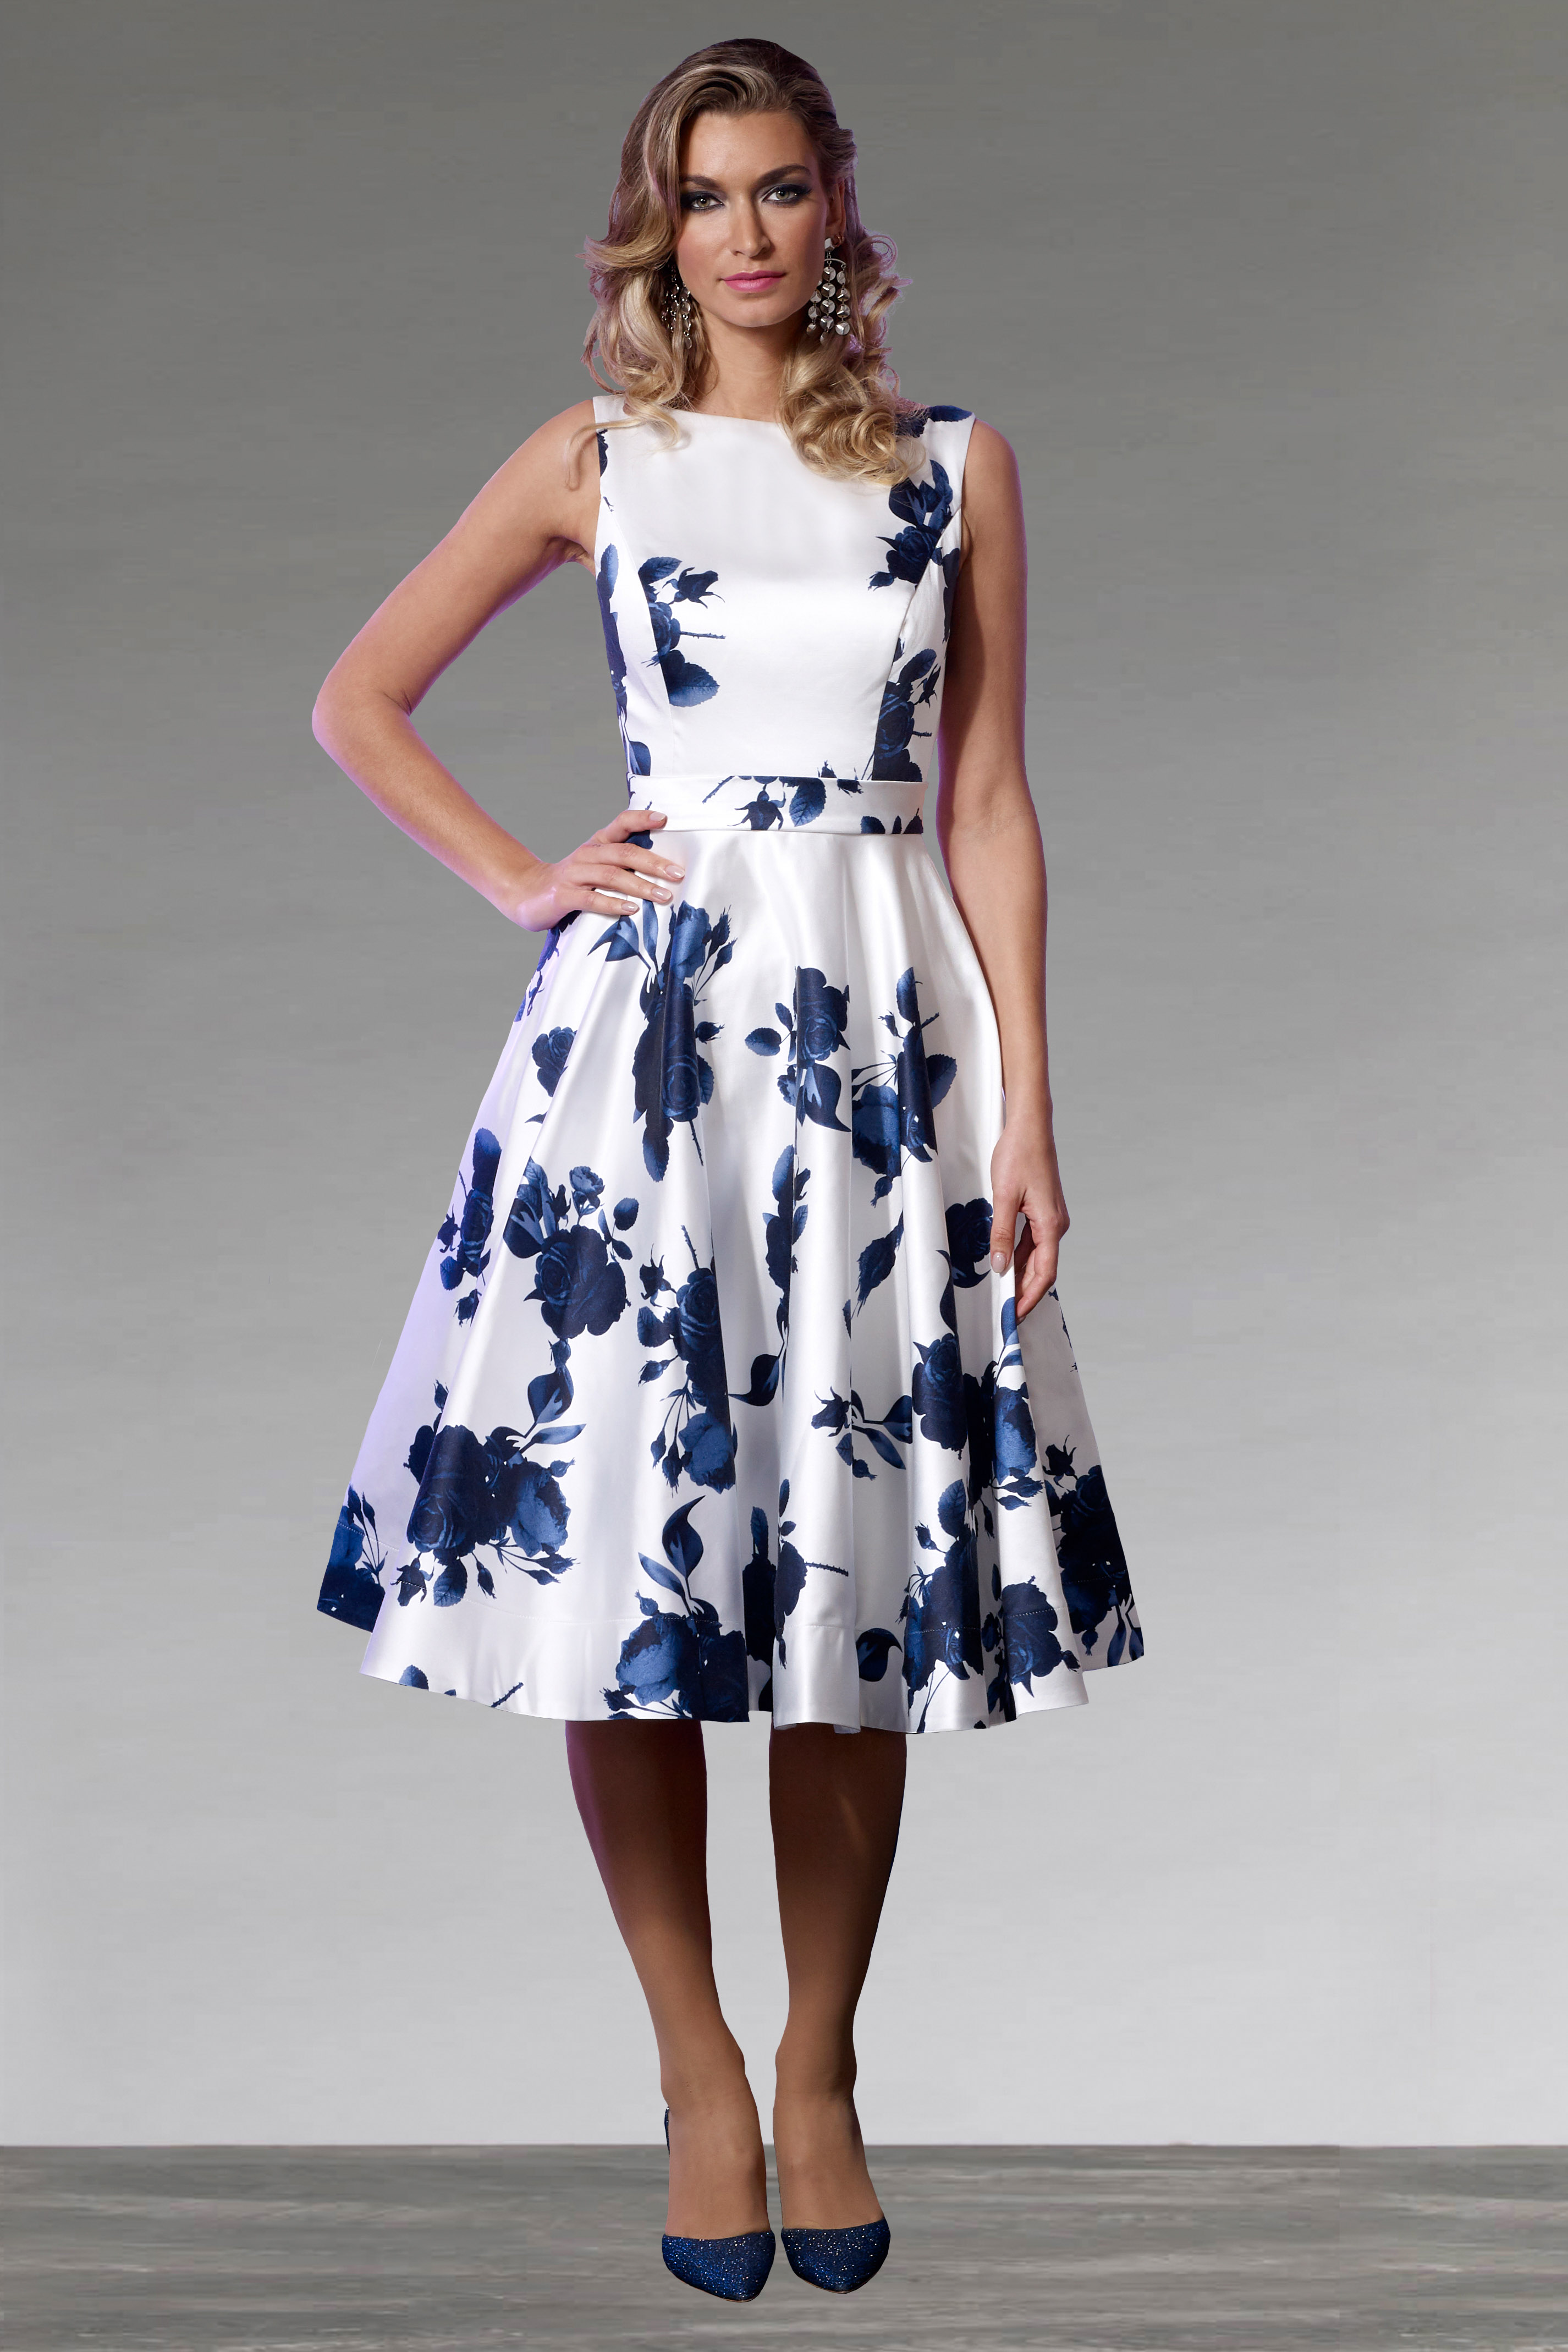 Short floral dress with full skirt. VO4650 - Catherines of Partick